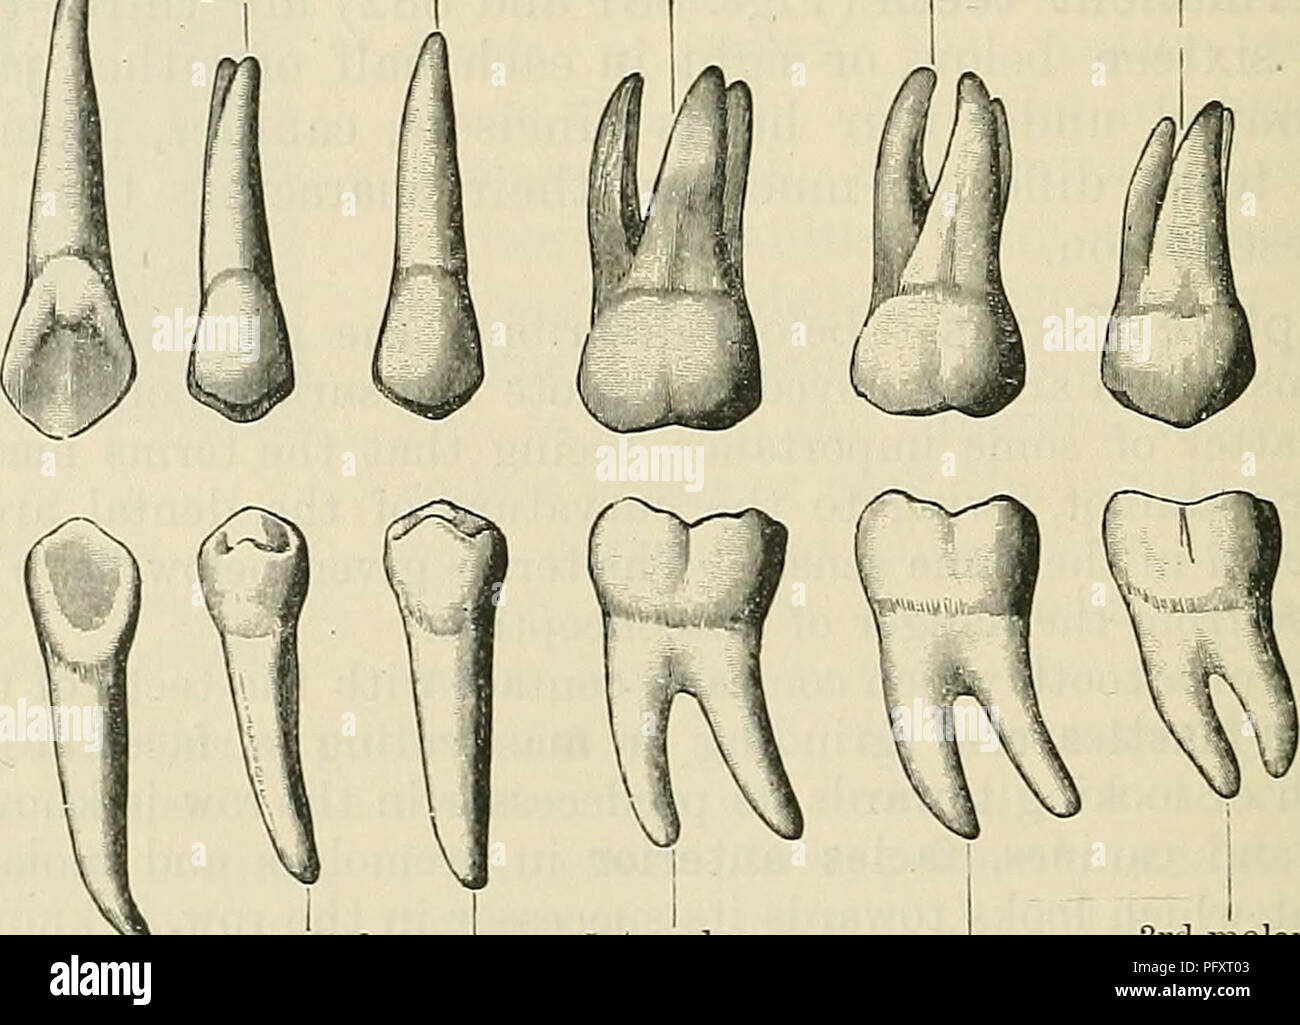 . Cunningham's Text-book of anatomy. Anatomy. Lateral incisor [• 1st premolar 1st molar | 3rd molar Central incisor Canine • 2nd premolar 2nd molar Fig. 882.—The Permanent Teeth of the Right Side, Lingual Aspect. The upper row shows the upper teeth, the lower row the lower teeth. The cingulum is distinct on the upper incisors and both canines, the lingual tubercle on the upper lateral incisor and the upper canine. the lateral angle of the crown is more rounded than the medial. The concave lingual surface of the crown in the upper incisors is usually limited towards the gum by a A-shaped ridge  Stock Photo